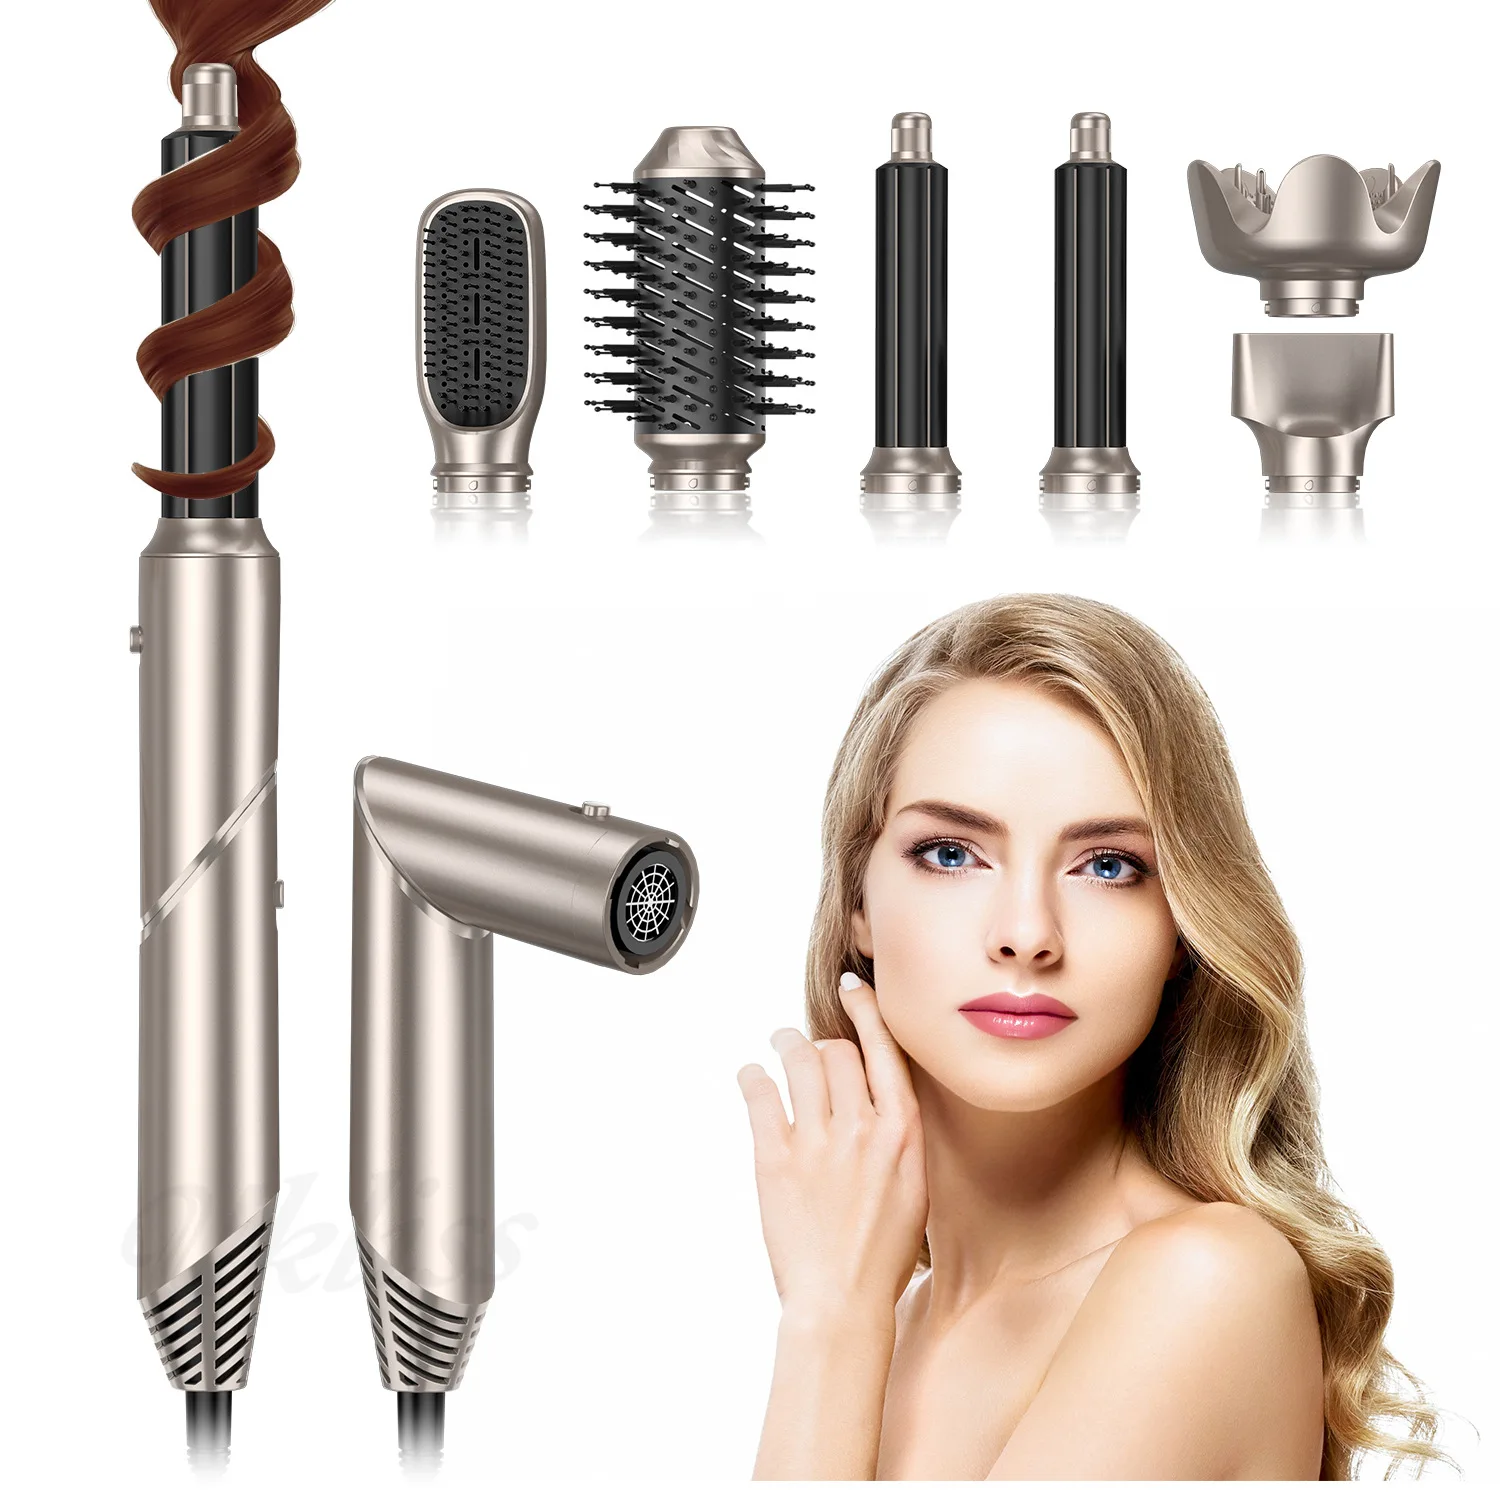 High-speed 6-in-1 Folding Hot Air Comb Automatic Curling Iron Curling Straight Dual Purpose Styling Comb Electric Hair Dryer paradise umbrella windproof umbrella creative folding umbrella dual purpose men umbrella double wind increase durable water repe